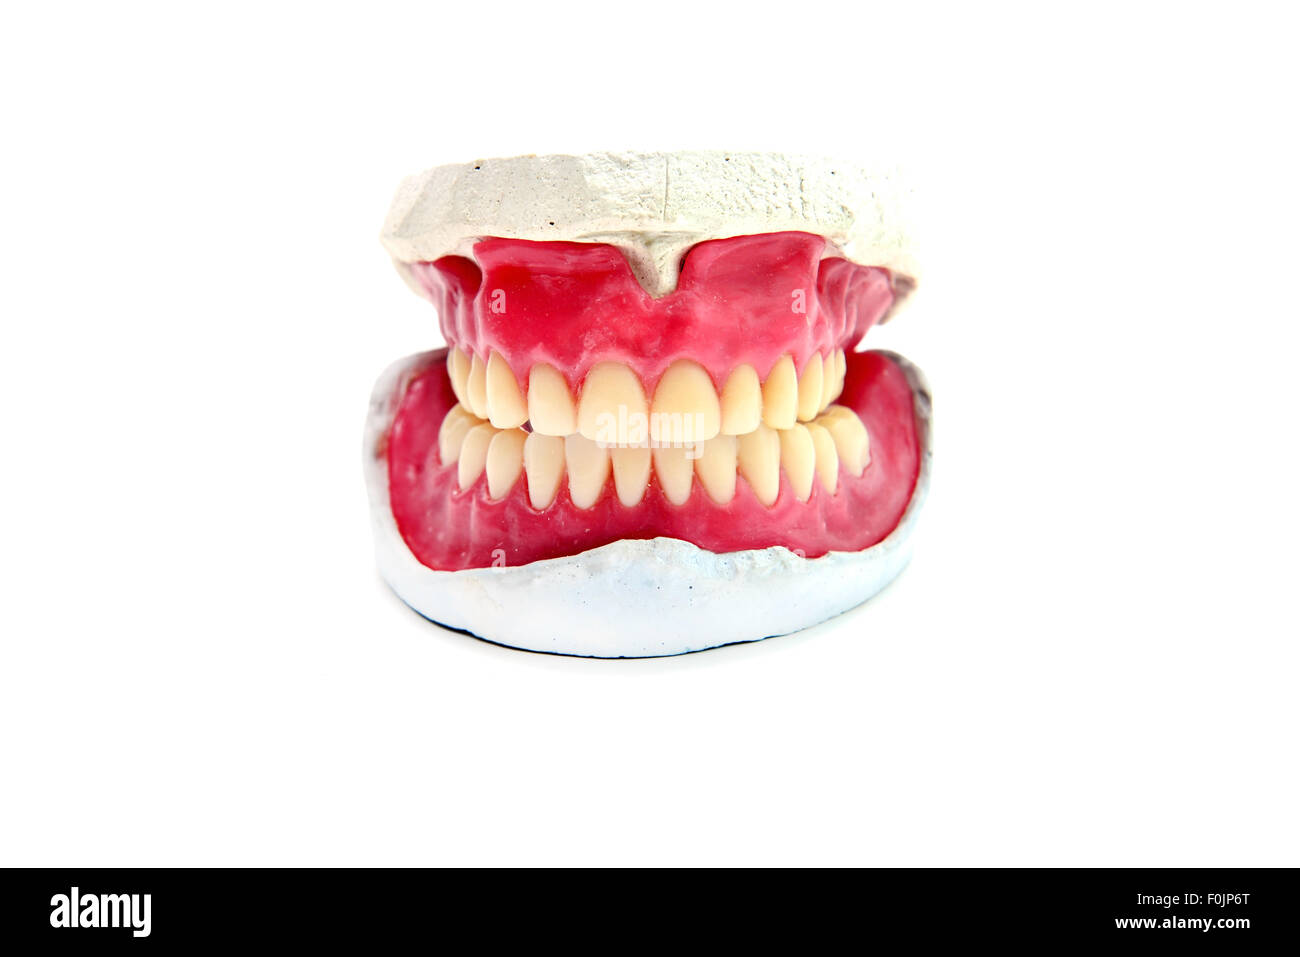 Colorful dental braces or retainer on teeth mold, clay human gums model  Stock Photo - Alamy